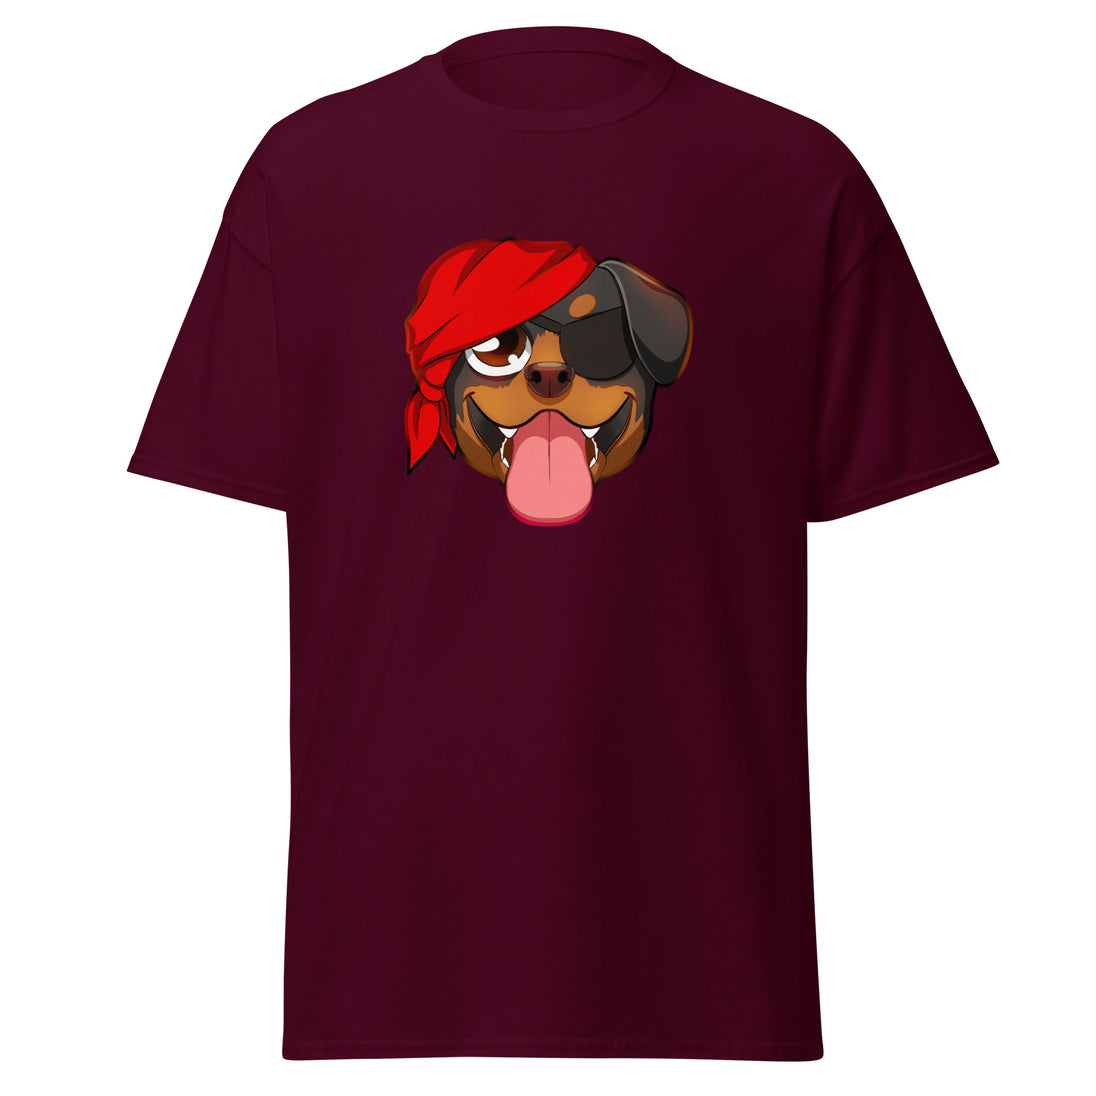 Pirate Dog Gamer T-Shirt - Soft, Comfortable, and Unique Design for Twitch Streamers and Gamers